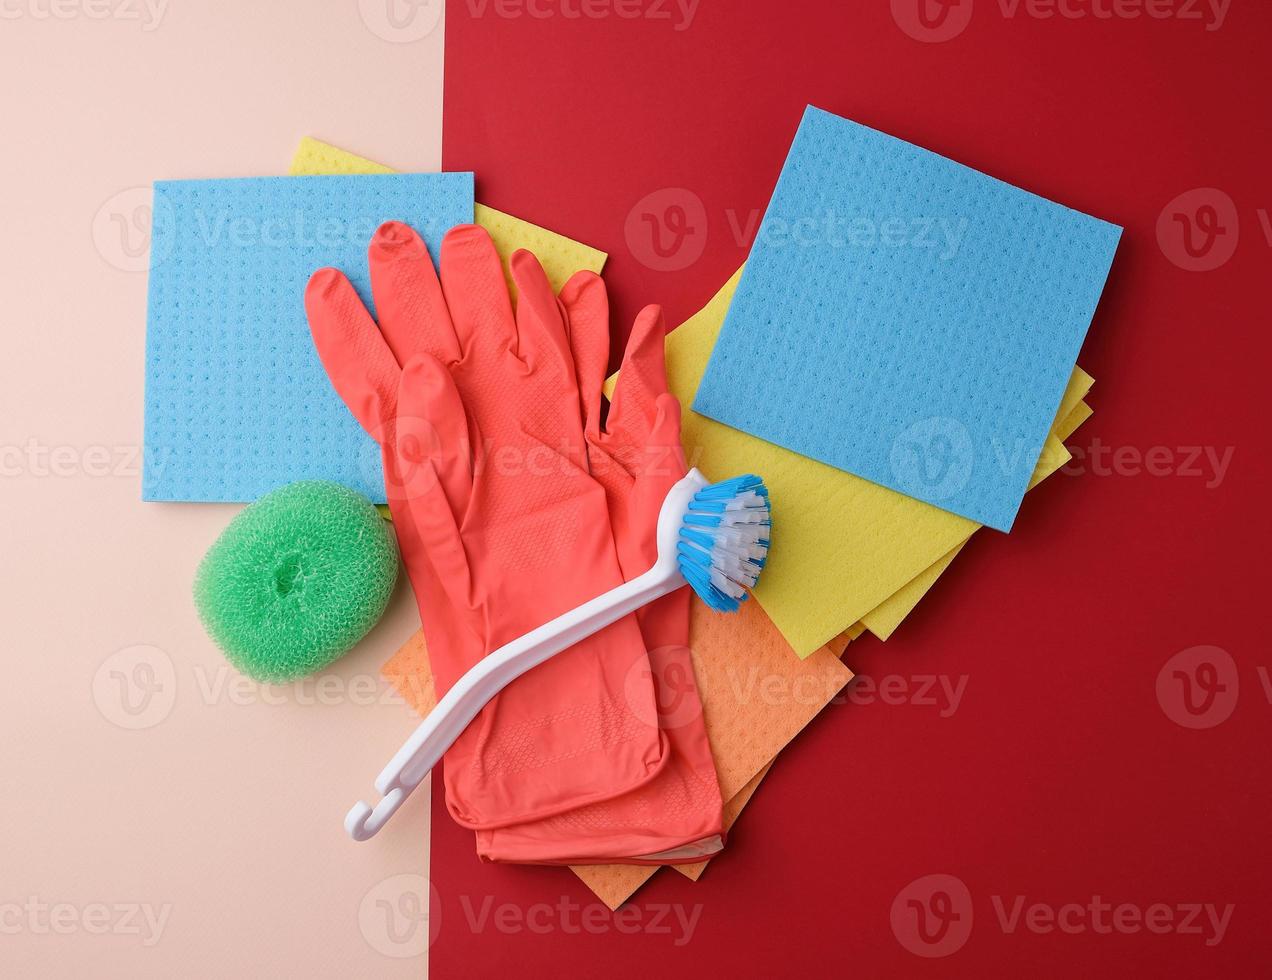 items for home cleaning red rubber gloves, brush, multi-colored sponges photo